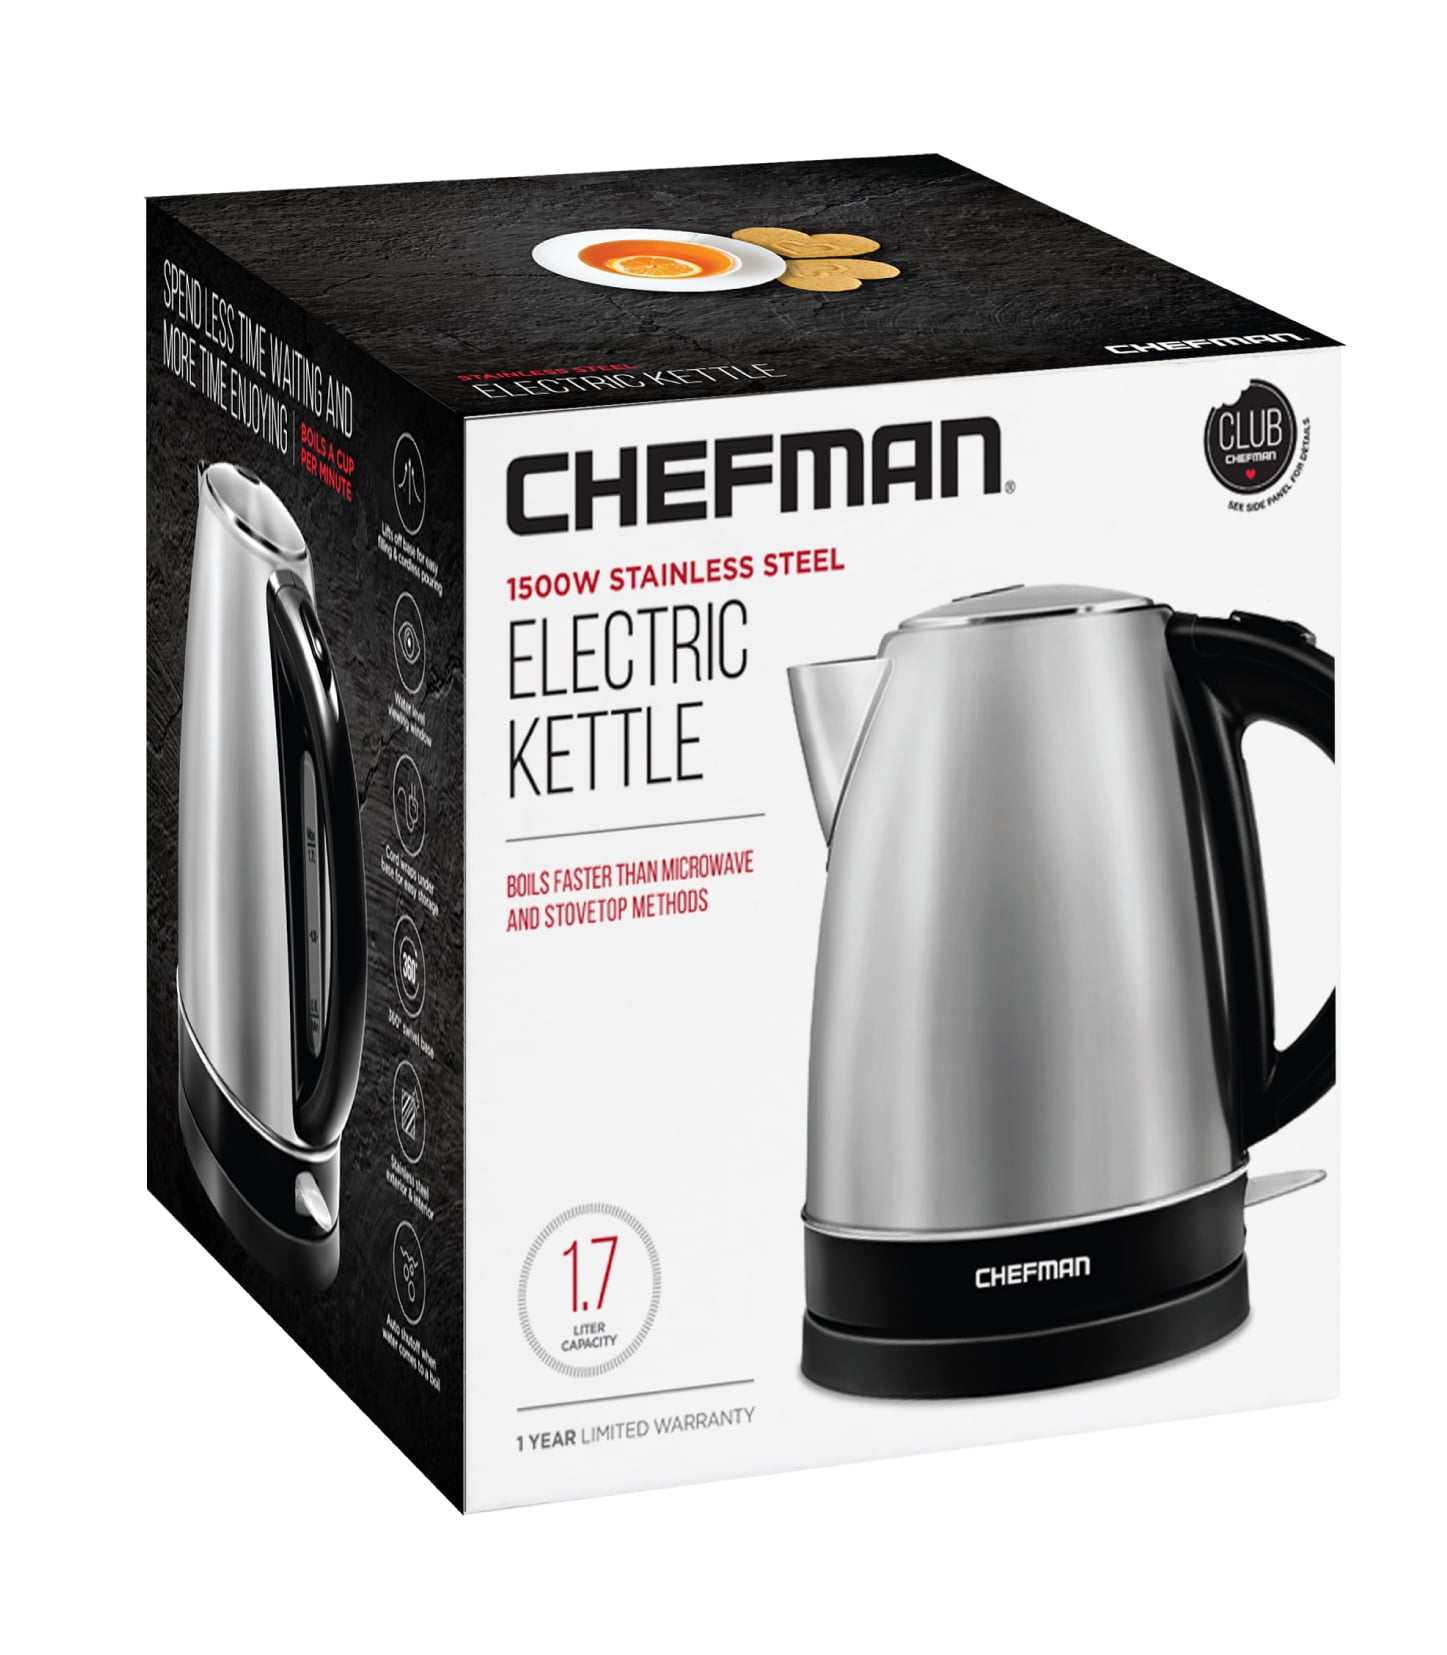 Chefman Stainless Steel Electric Kettle, 1.7 L - Foods Co.